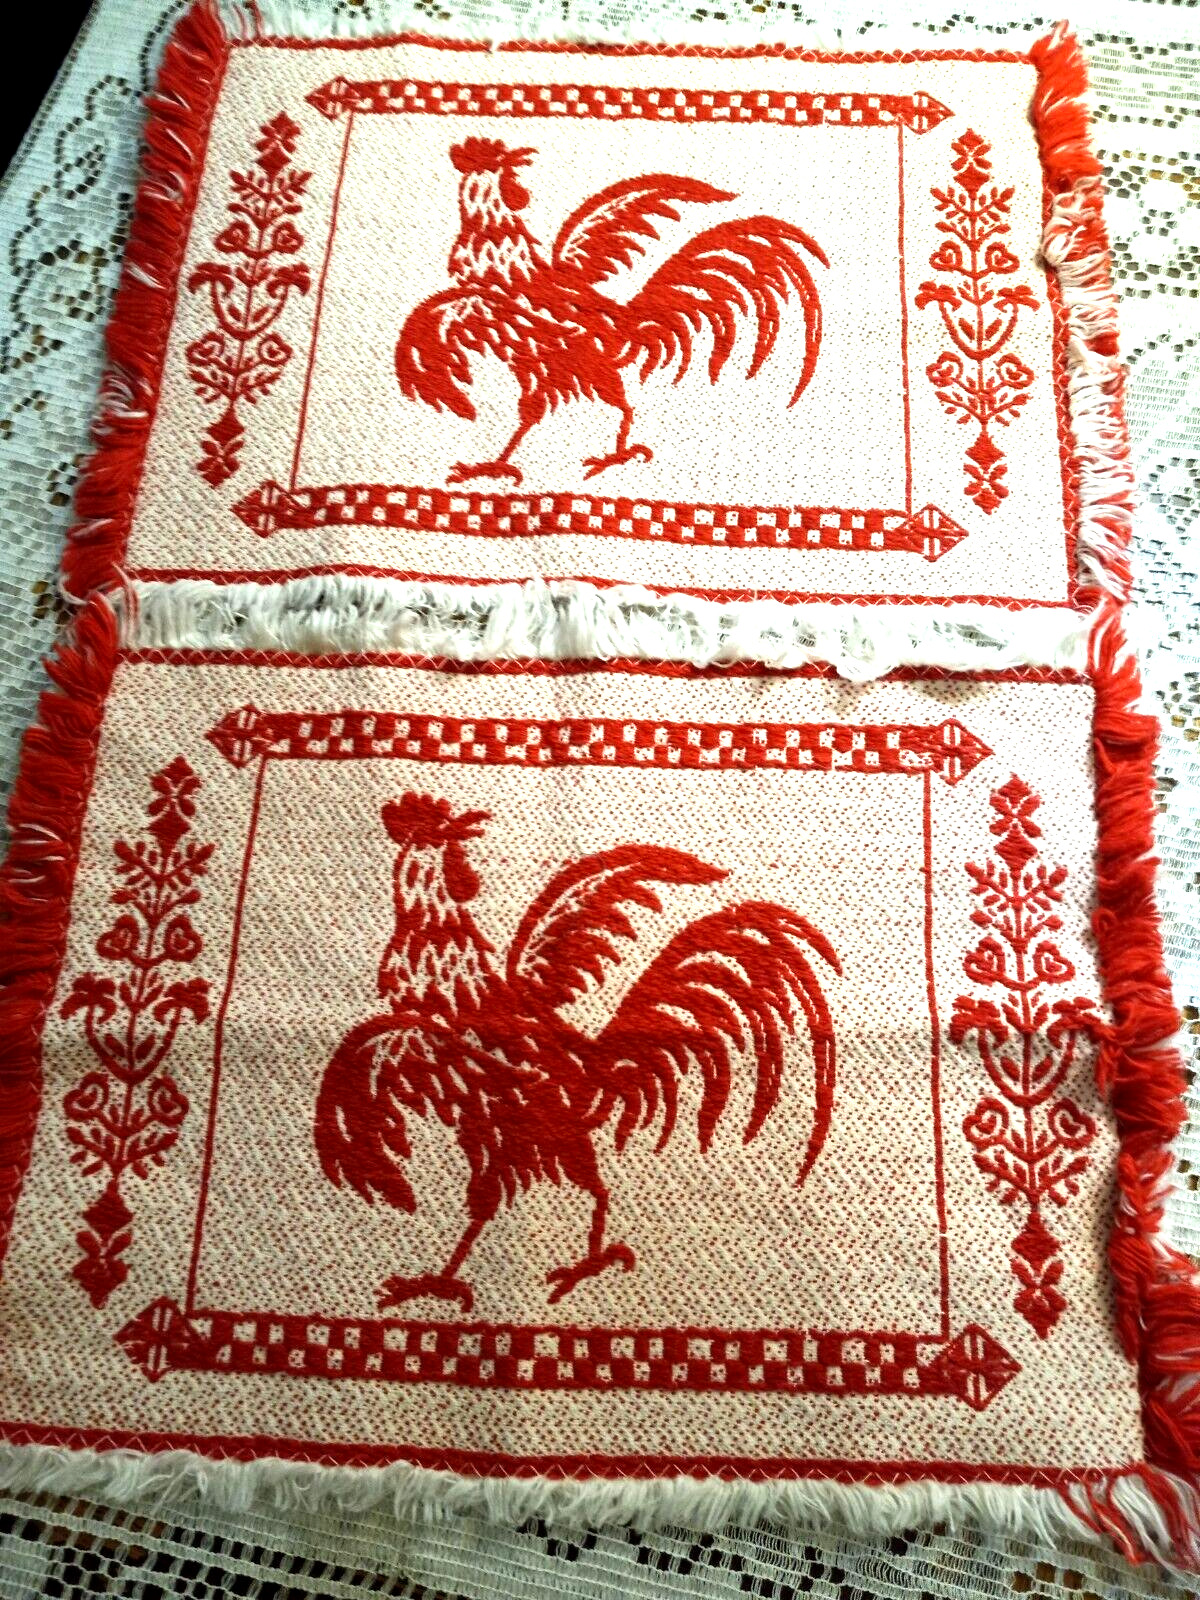 KItchen Placemats Roosters Vintage Set of 2 Cotton Weave Embroidery Red Cream